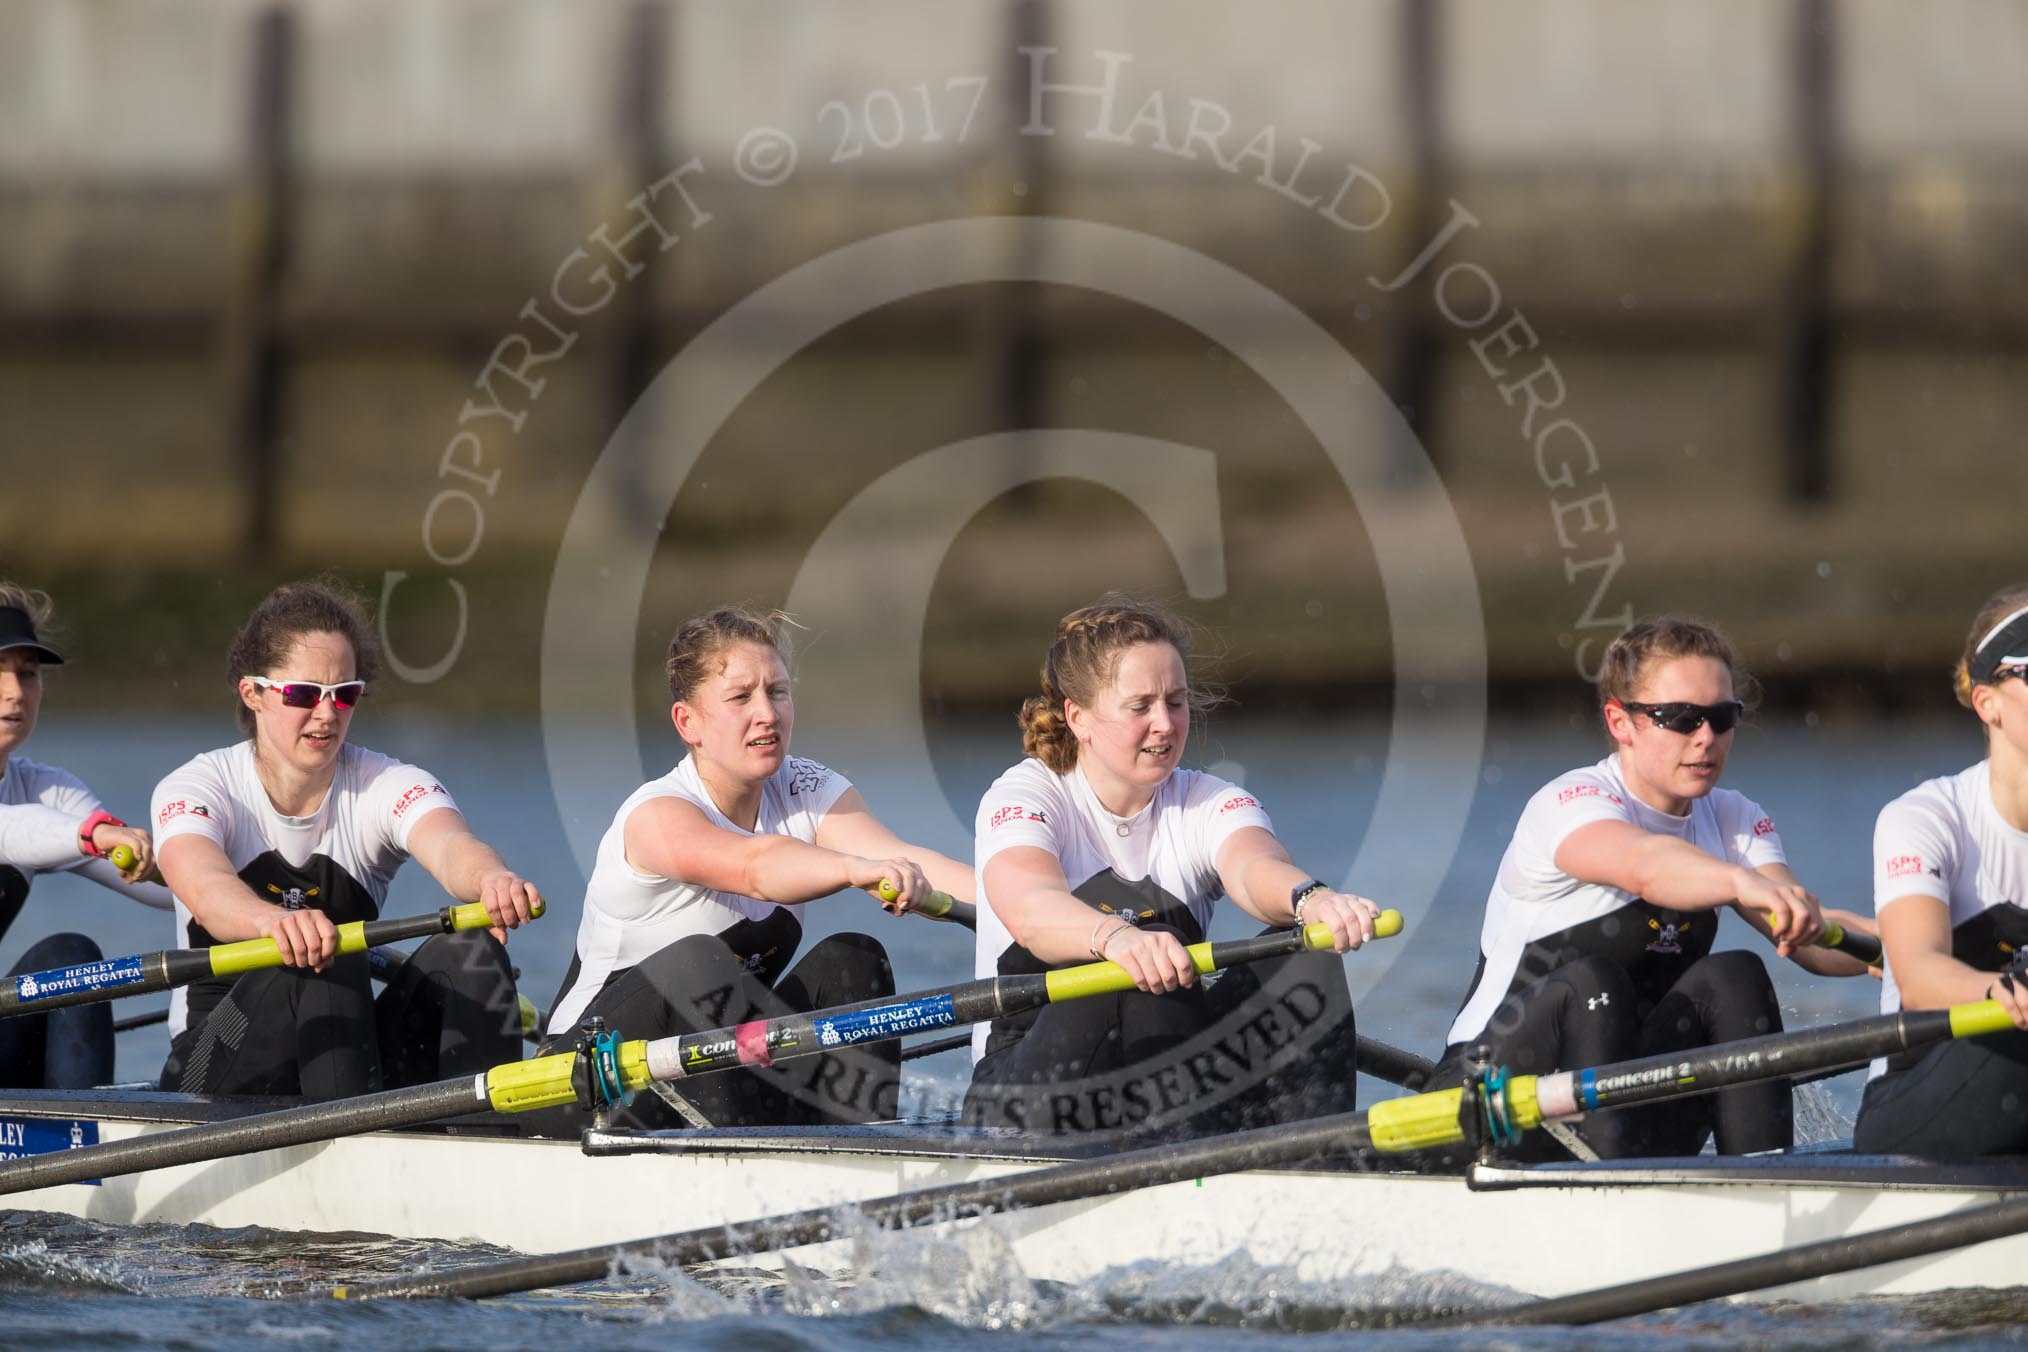 The Cancer Research UK Boat Race season 2017 - Women's Boat Race Fixture OUWBC vs Molesey BC: The Molesey boat, here bow Emma McDonald, 2 Caitlin Boyland, 3 Lucy Primmer, 4 Claire McKeown, 5 Katie Bartlett.
River Thames between Putney Bridge and Mortlake,
London SW15,

United Kingdom,
on 19 March 2017 at 16:05, image #90